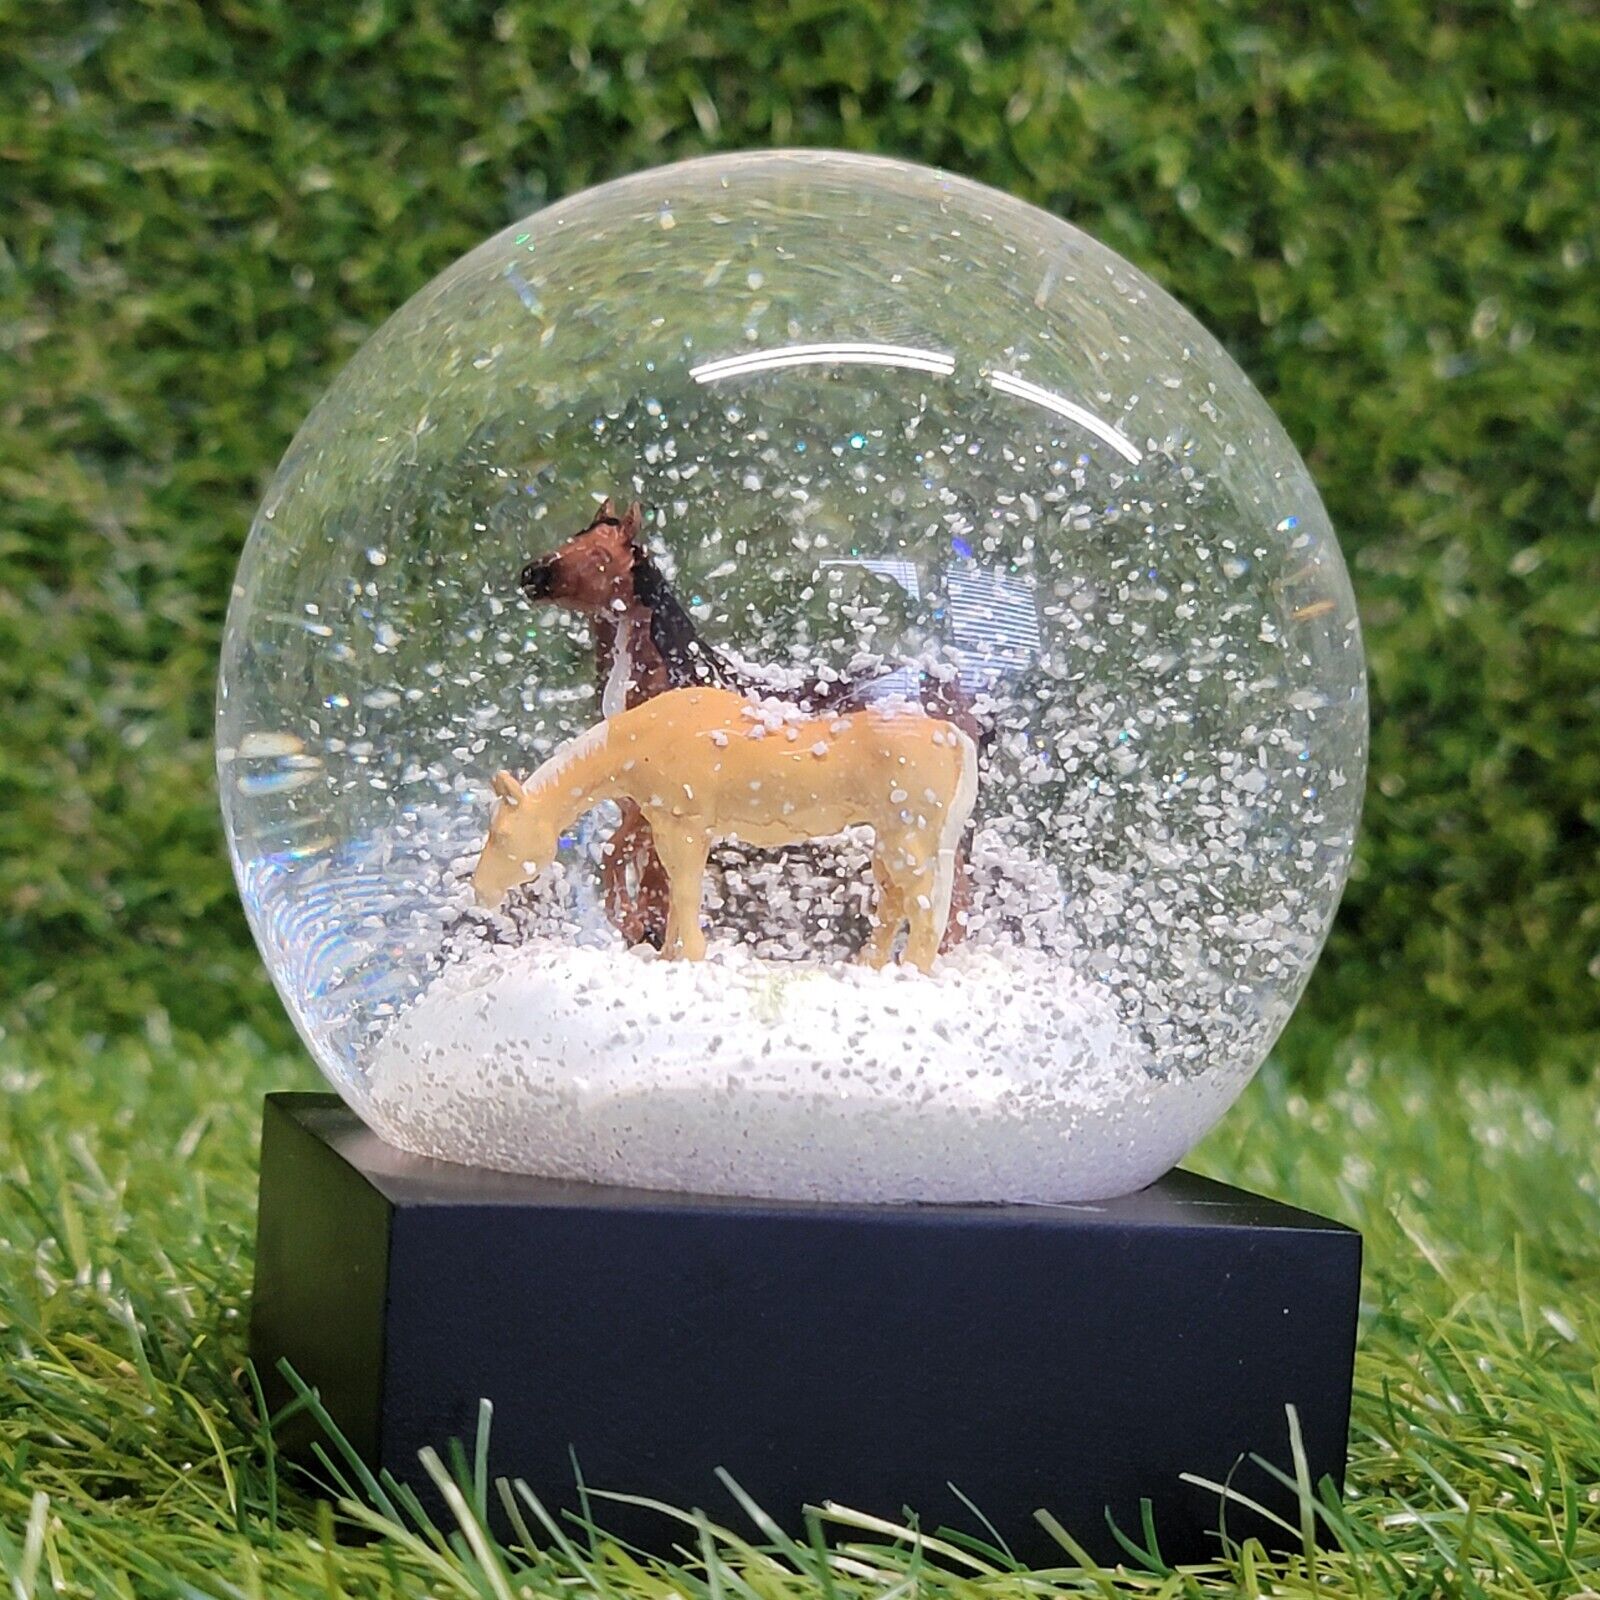 Snow Globe Two Horses Grazing By CoolSnowGlobes 2021